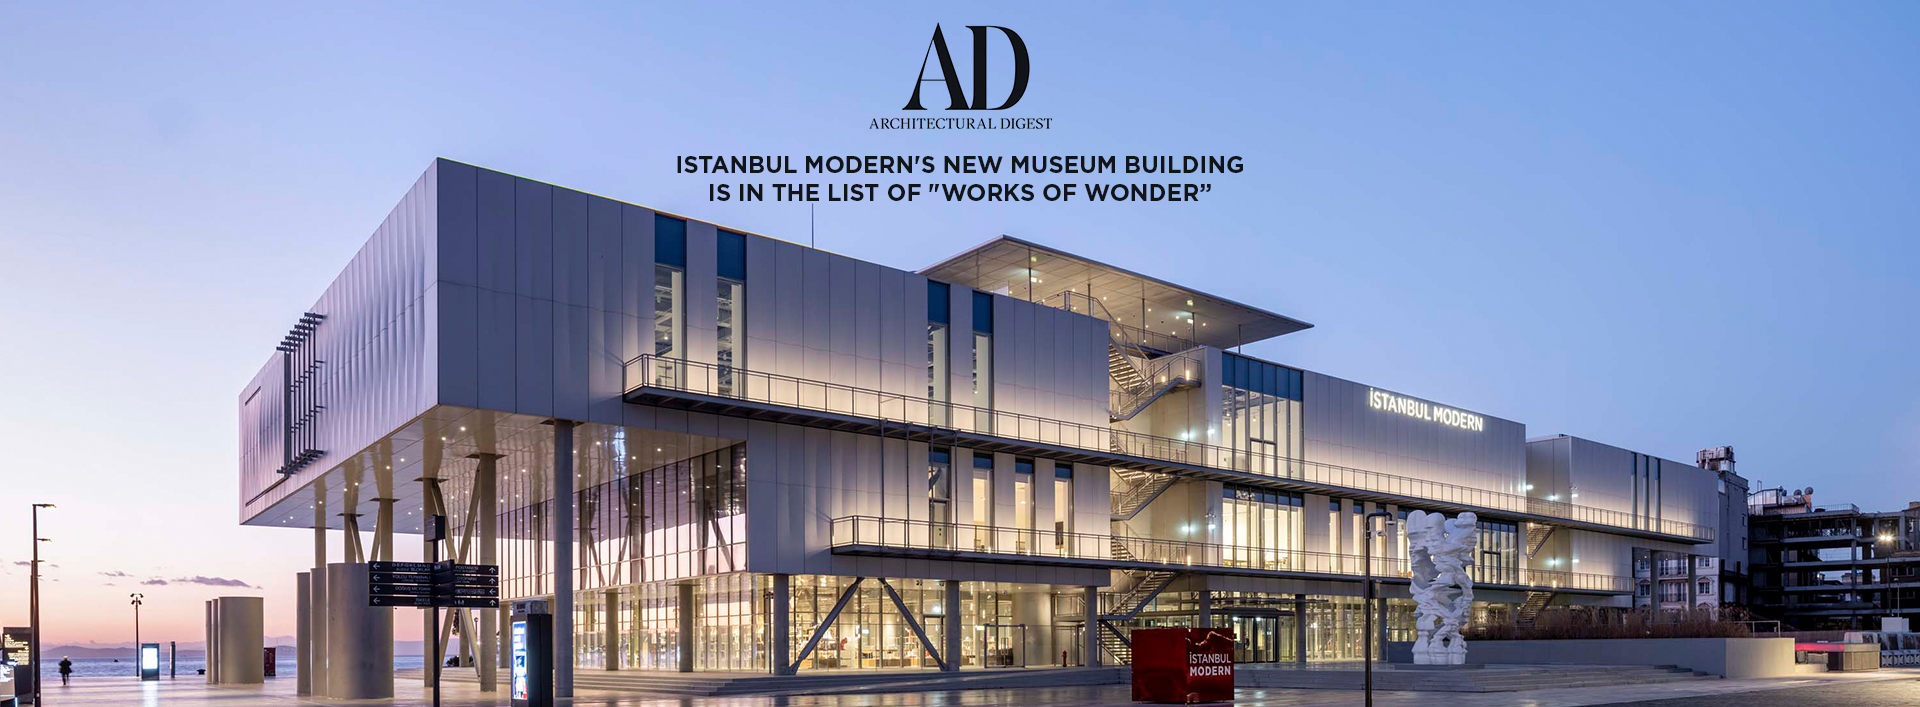 Istanbul Modern's News Museum Building is in the List Of "Works of Wonder"